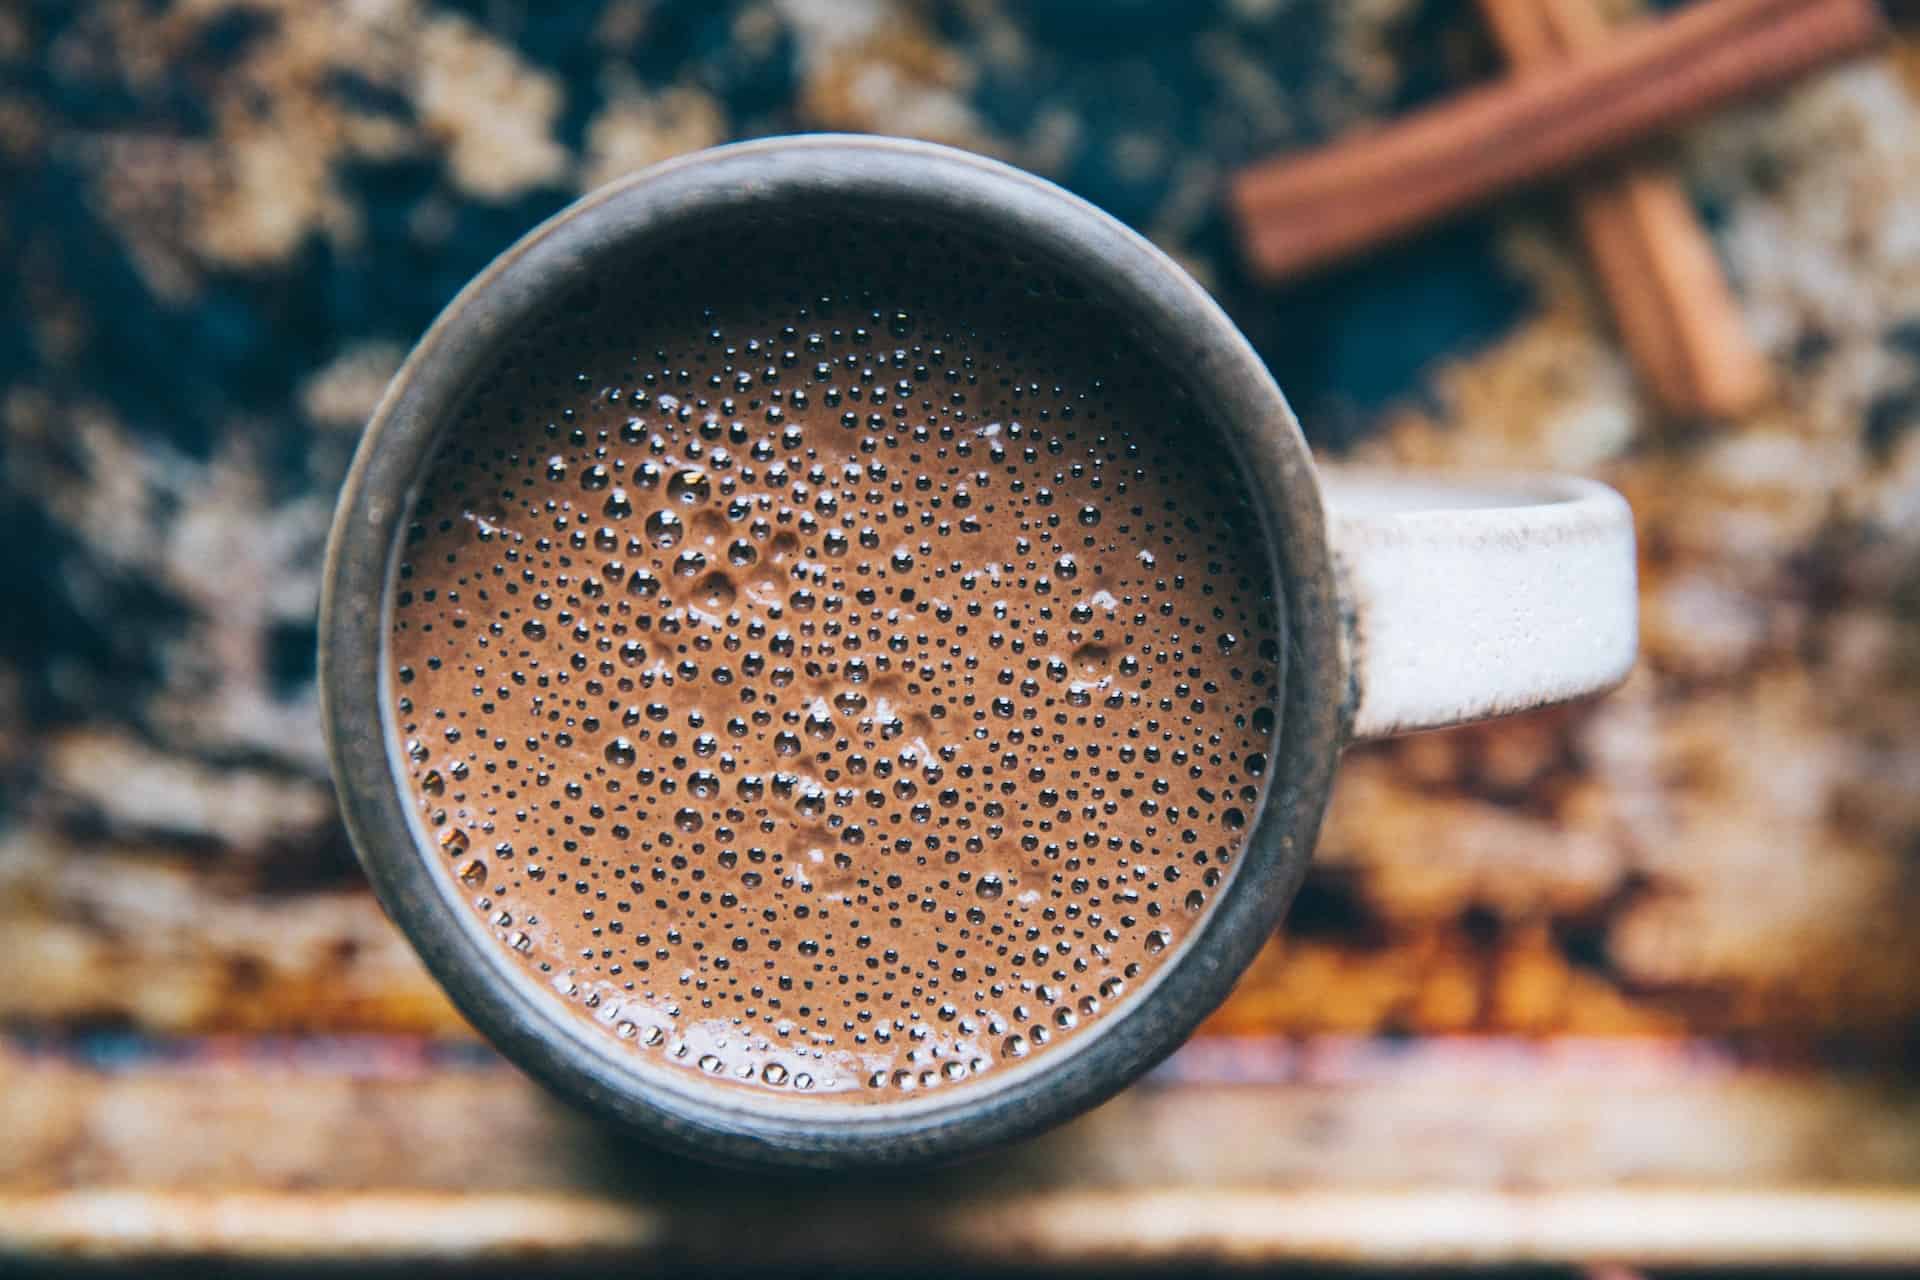 Delicious and nutritious: the cacao drink you need in your life